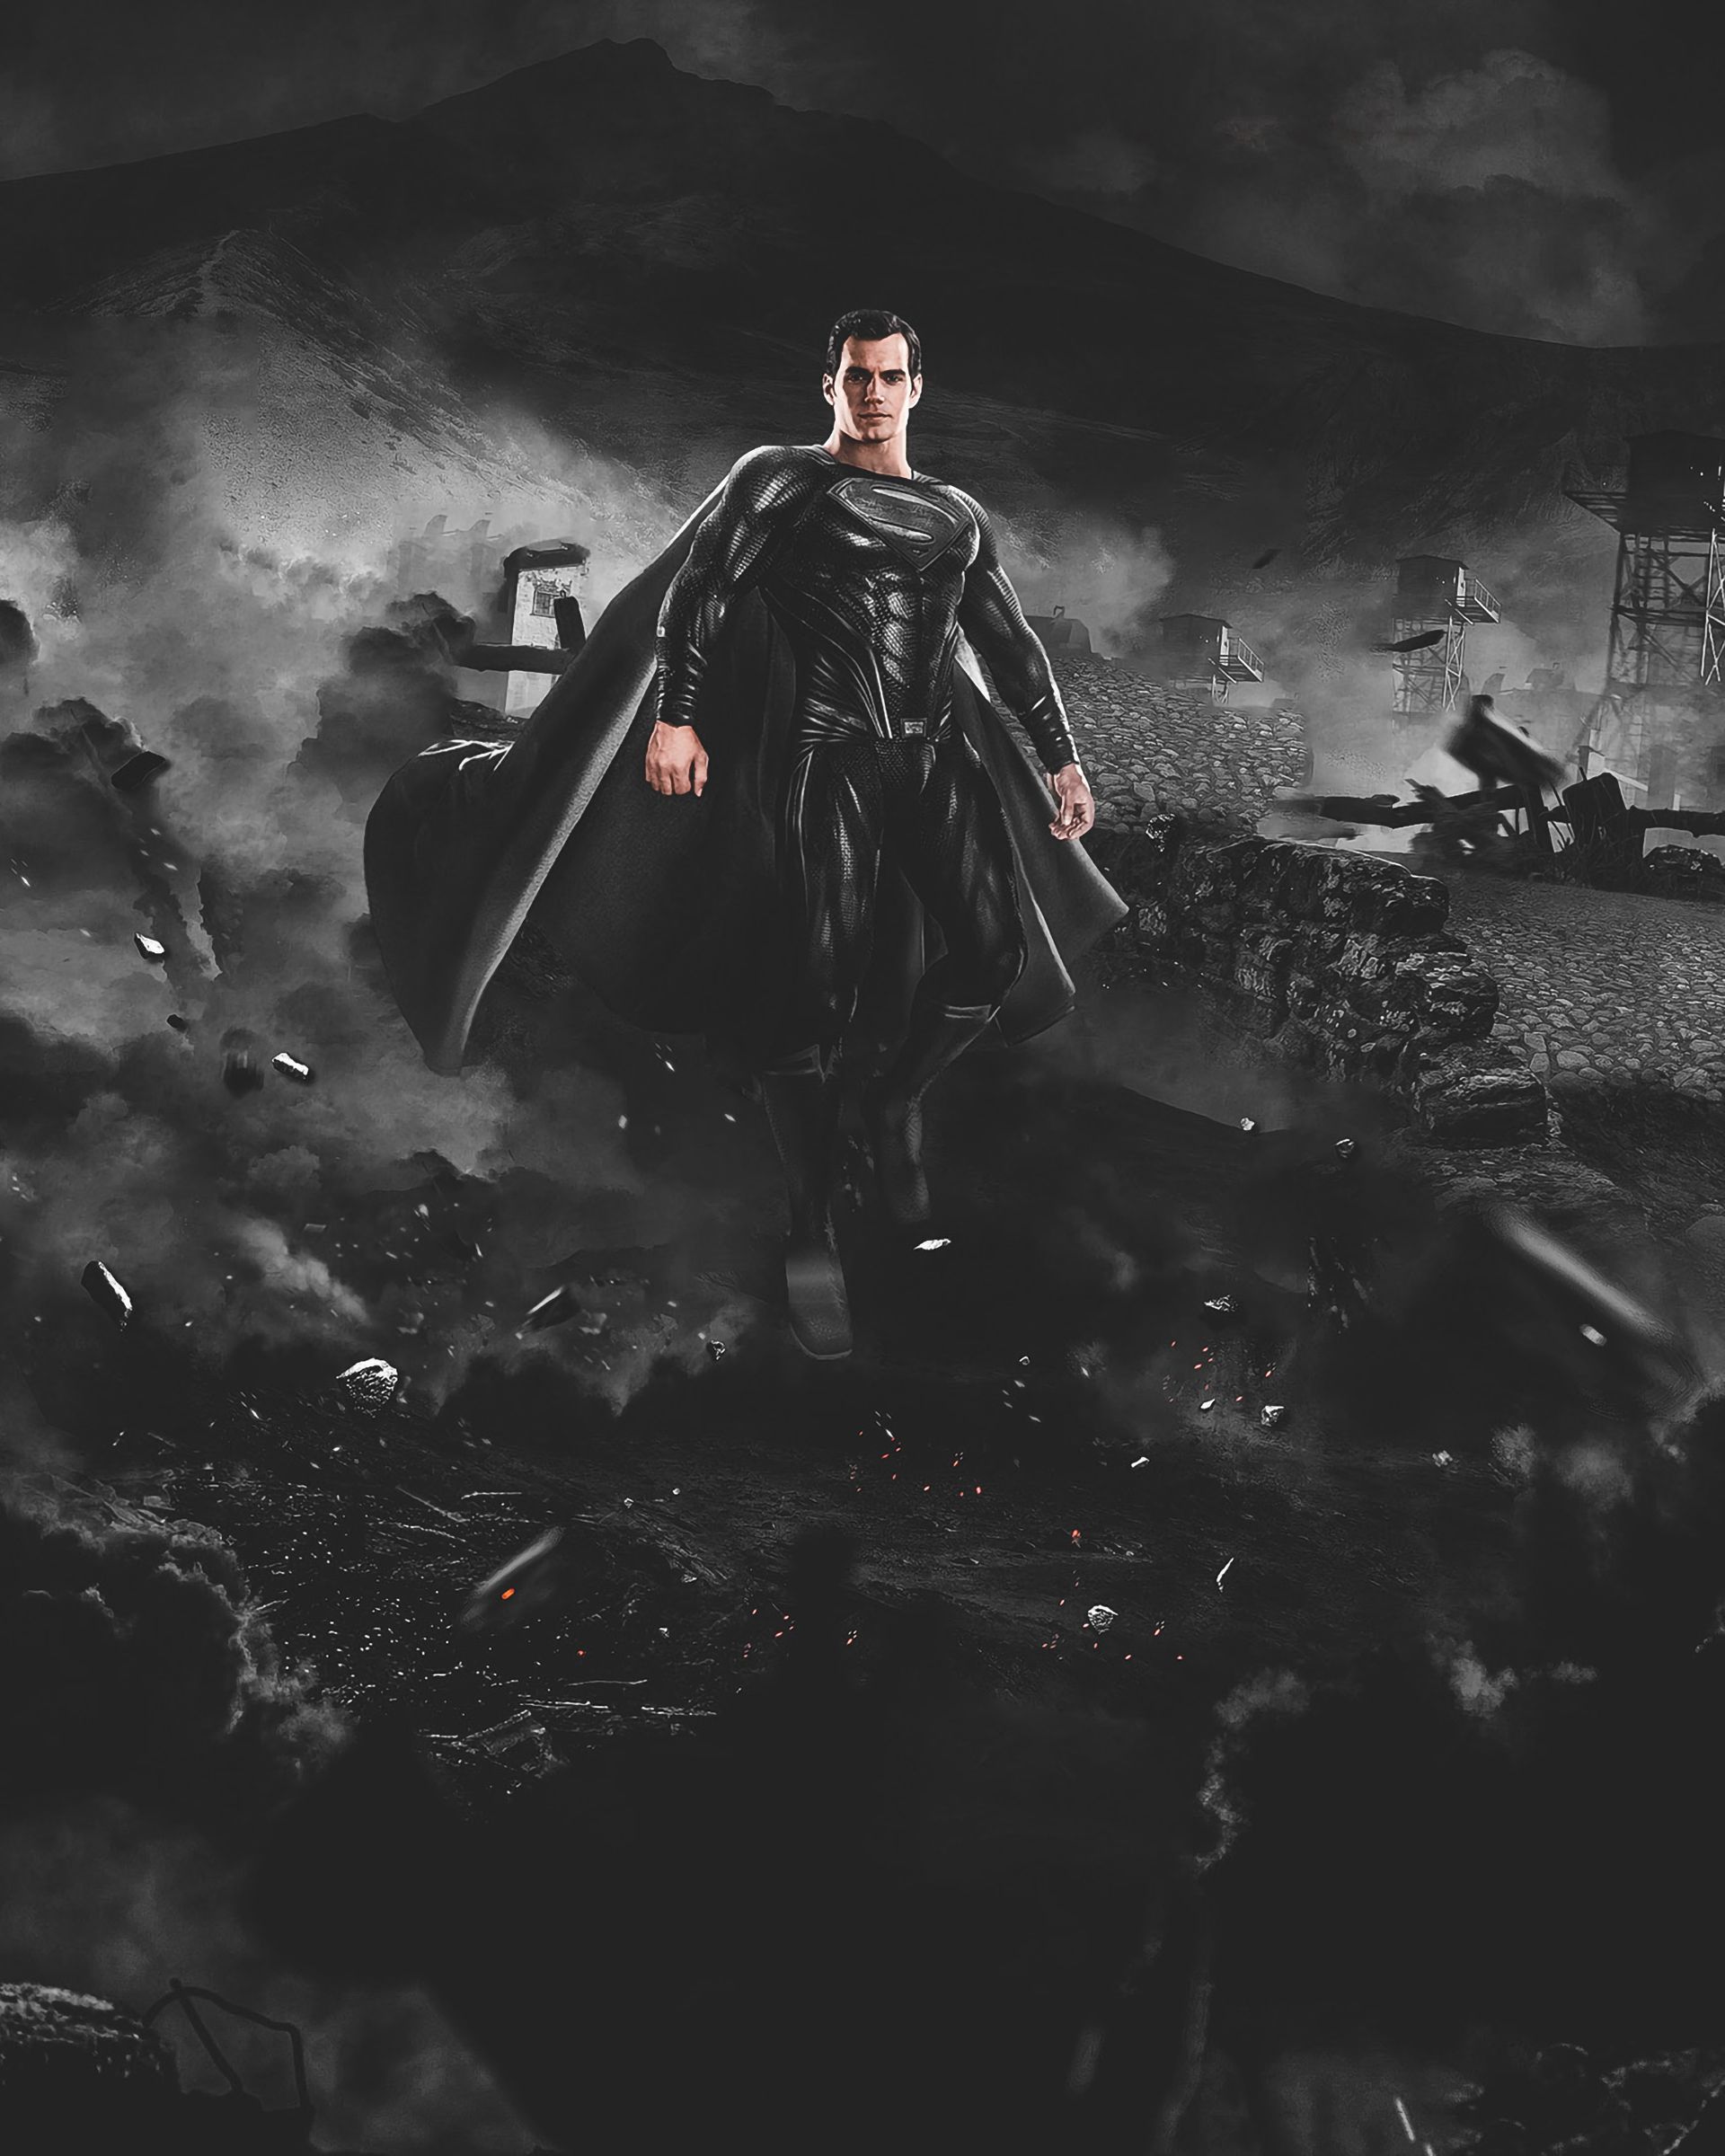 Superman Justice League Snyder Cut Art Wallpaper, HD Movies 4K Wallpaper, Image, Photo and Background